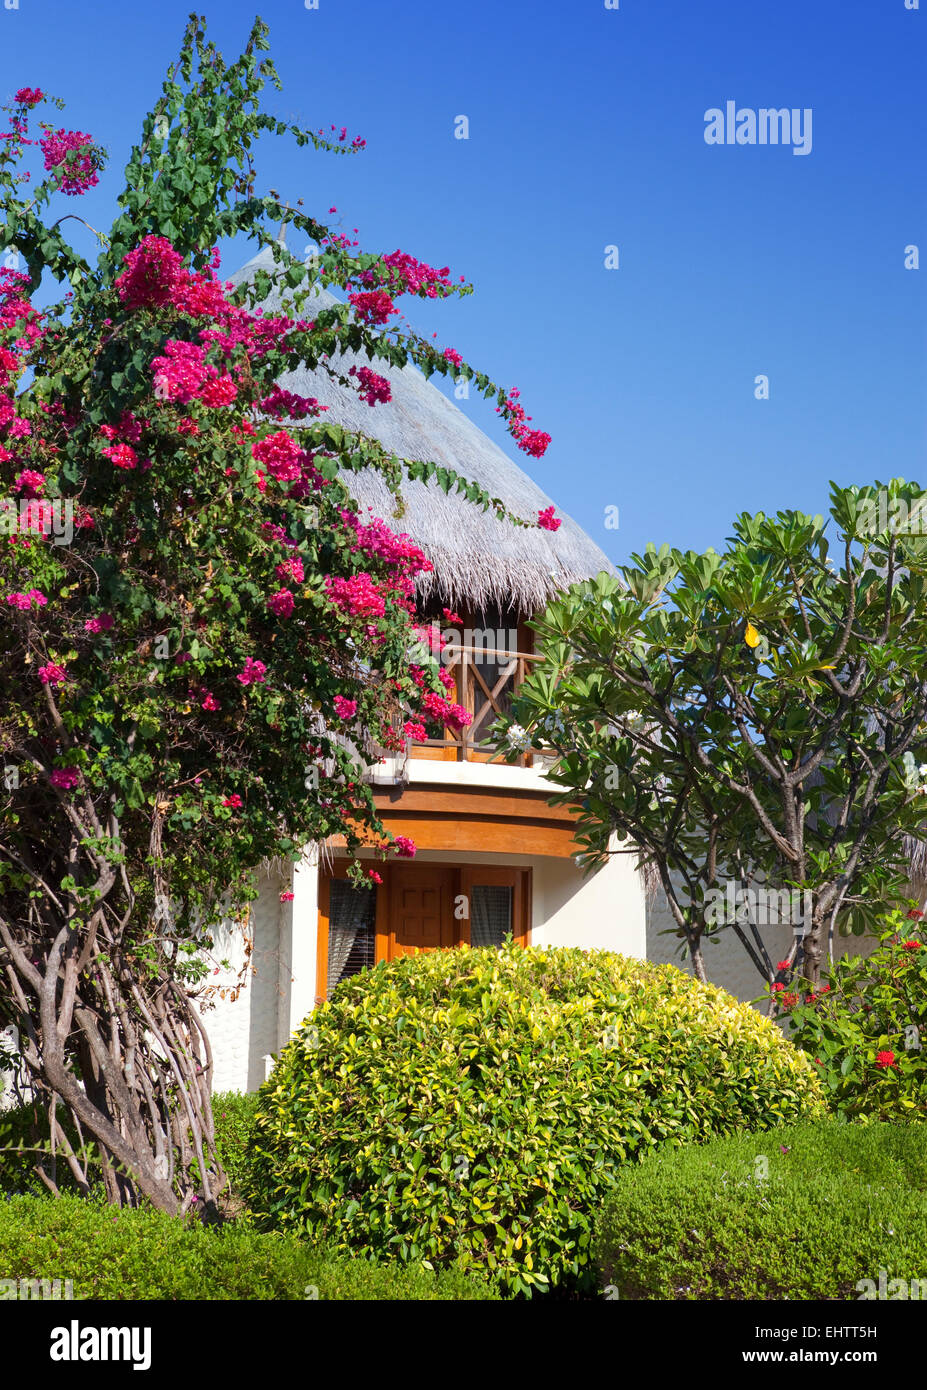 Traditional tropical hut in a garden Stock Photo